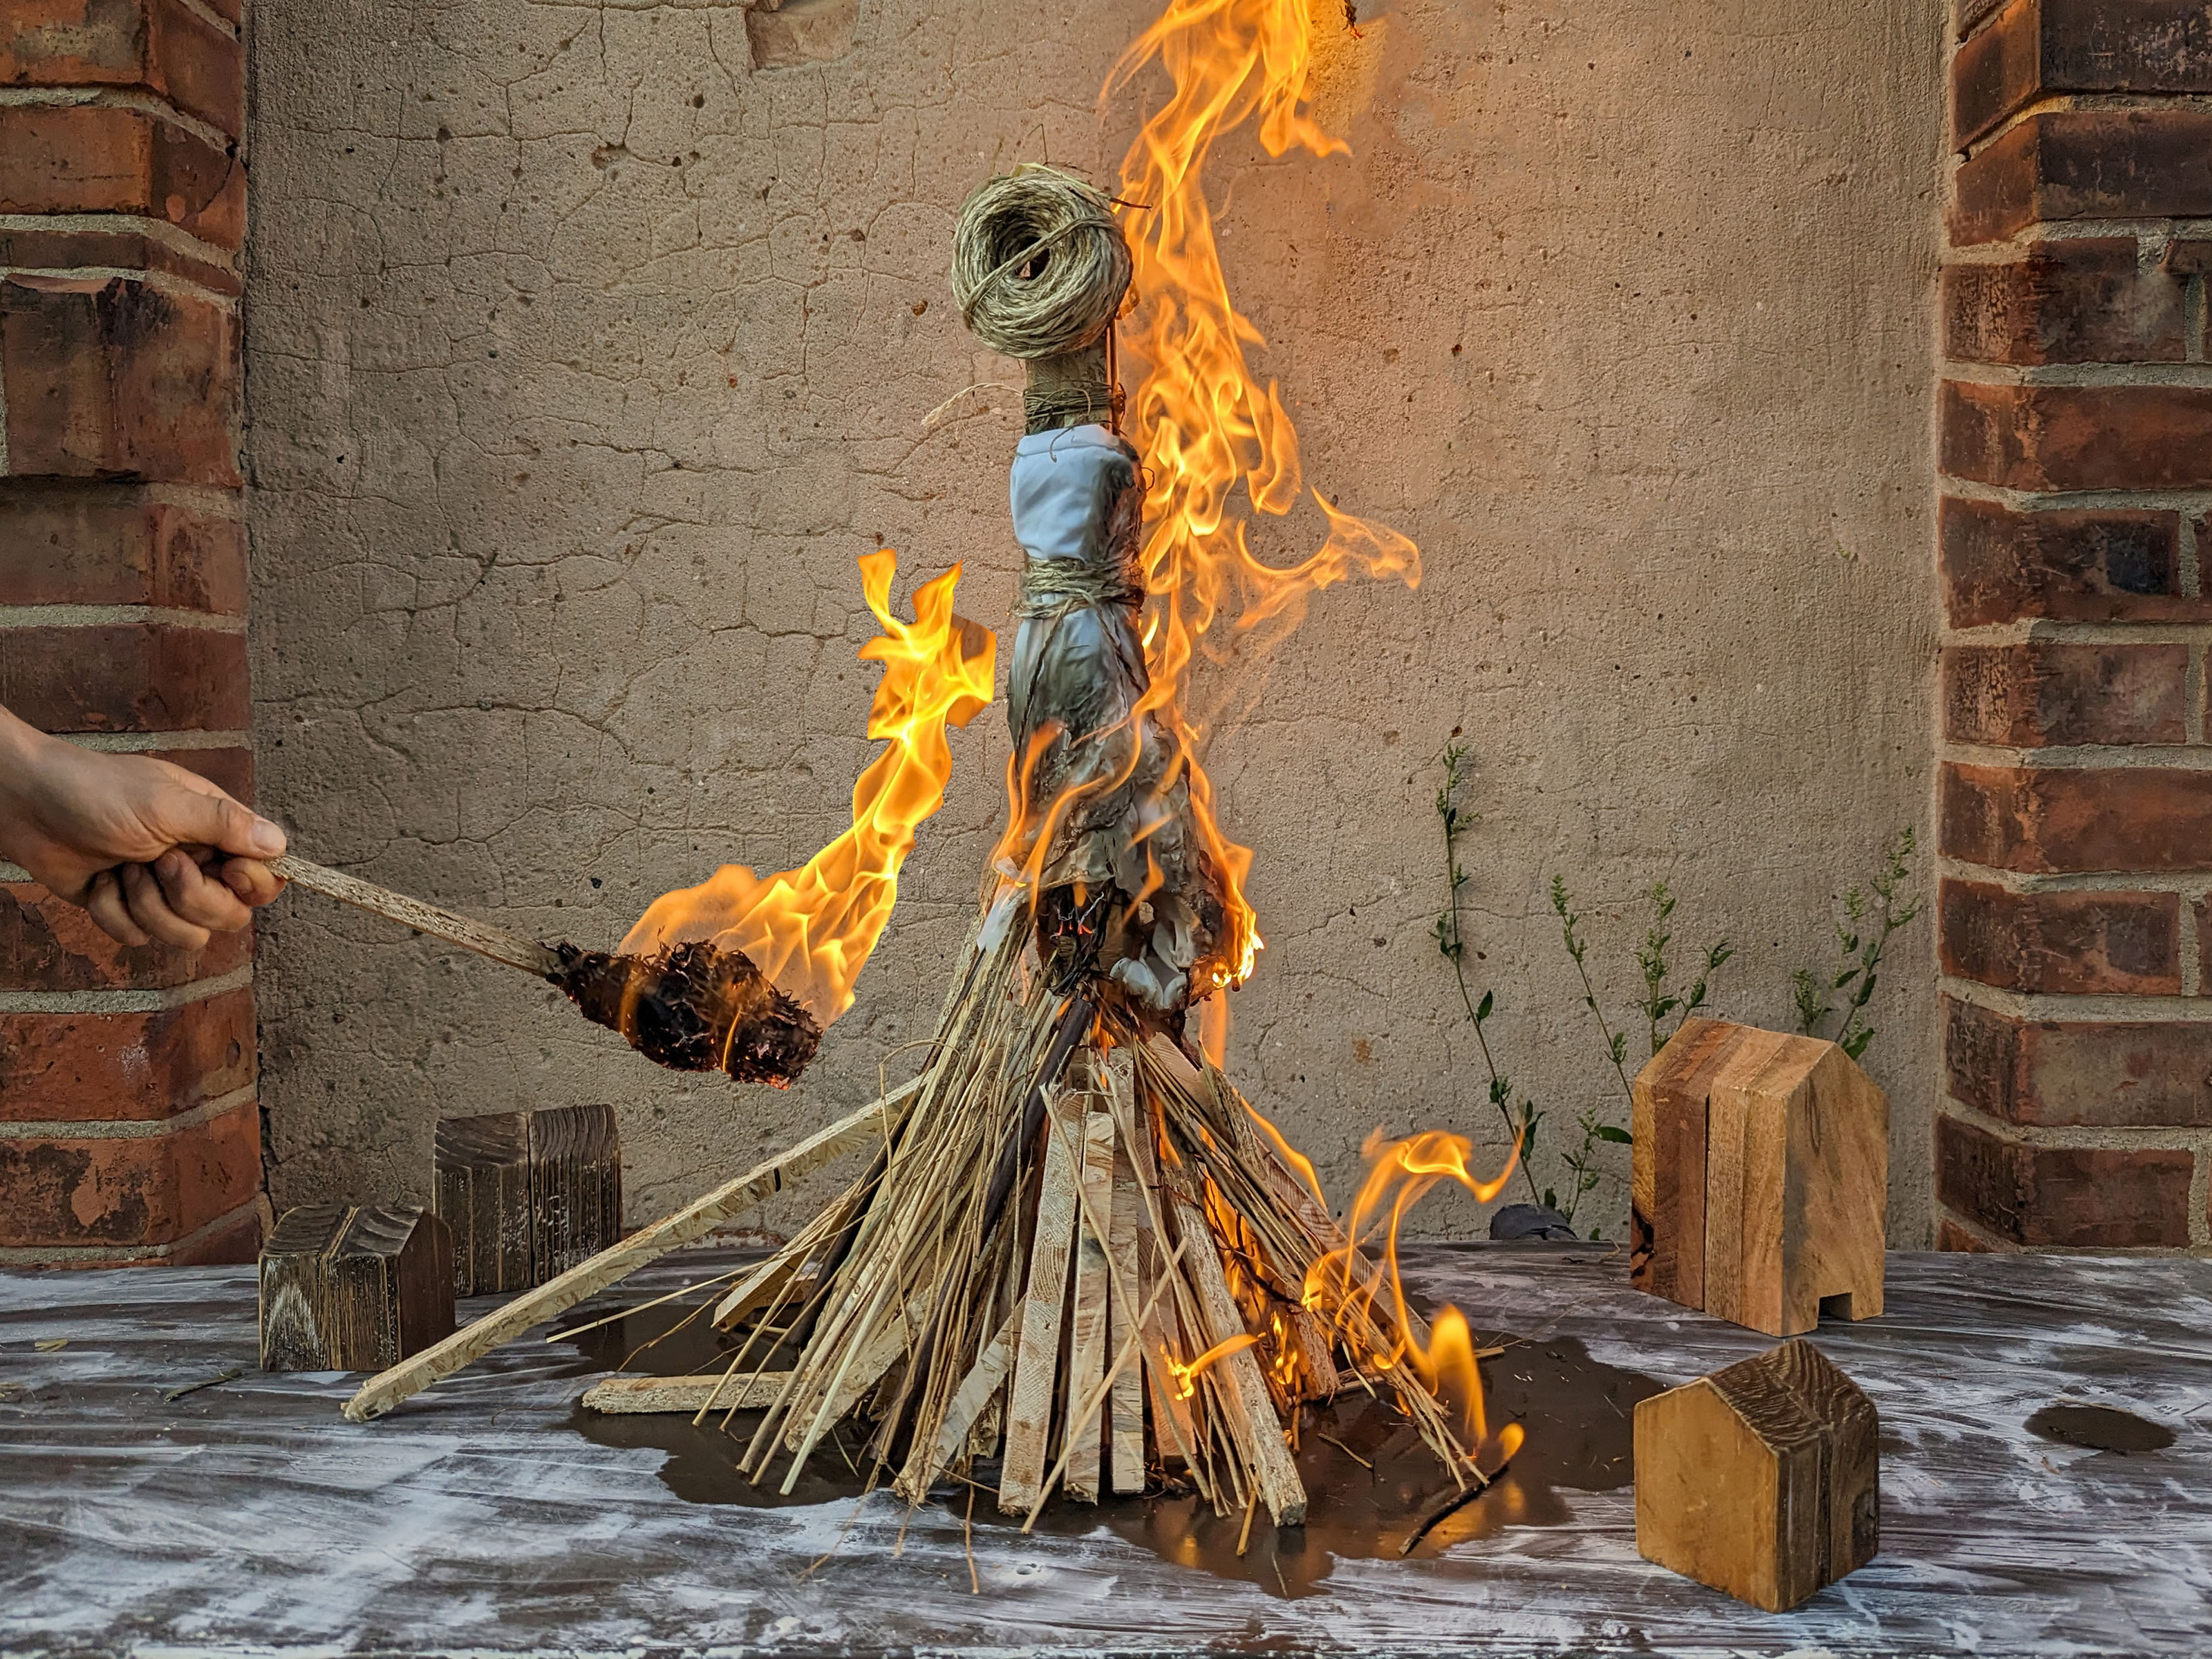 From the left a human hand with a wooden torch protrudes into the picture. It lights a pile of wood with a straw doll. The pile and the figure are ablaze.